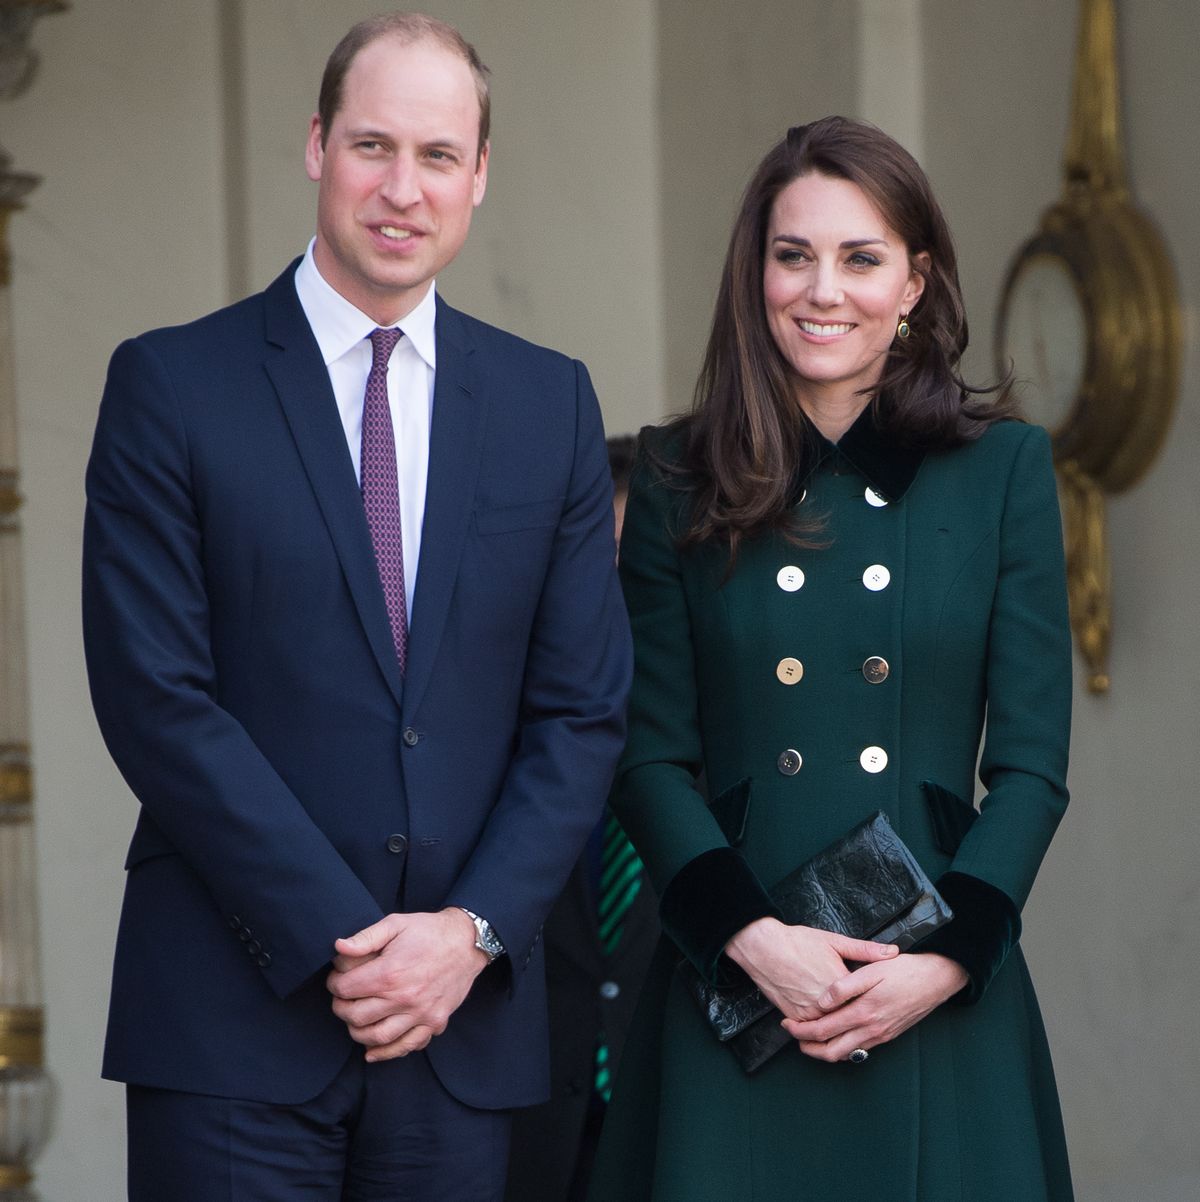 The Duke And Duchess Of Cambridge Visit Paris: Day One